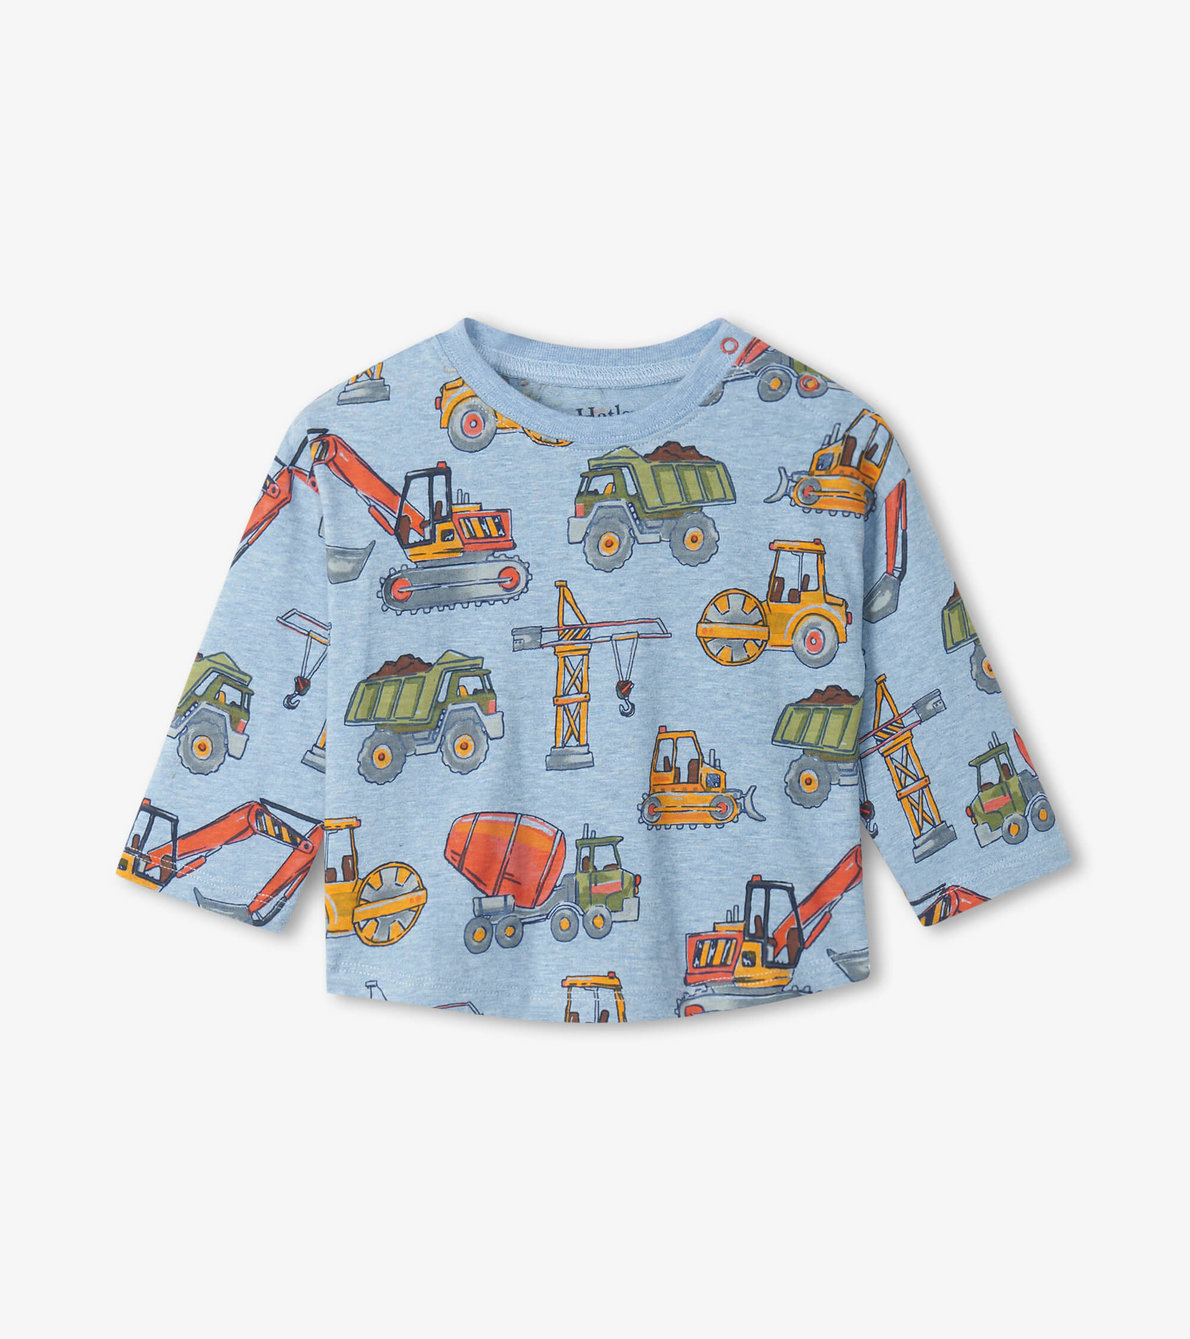 View larger image of Construction Trucks Long Sleeve Baby Tee